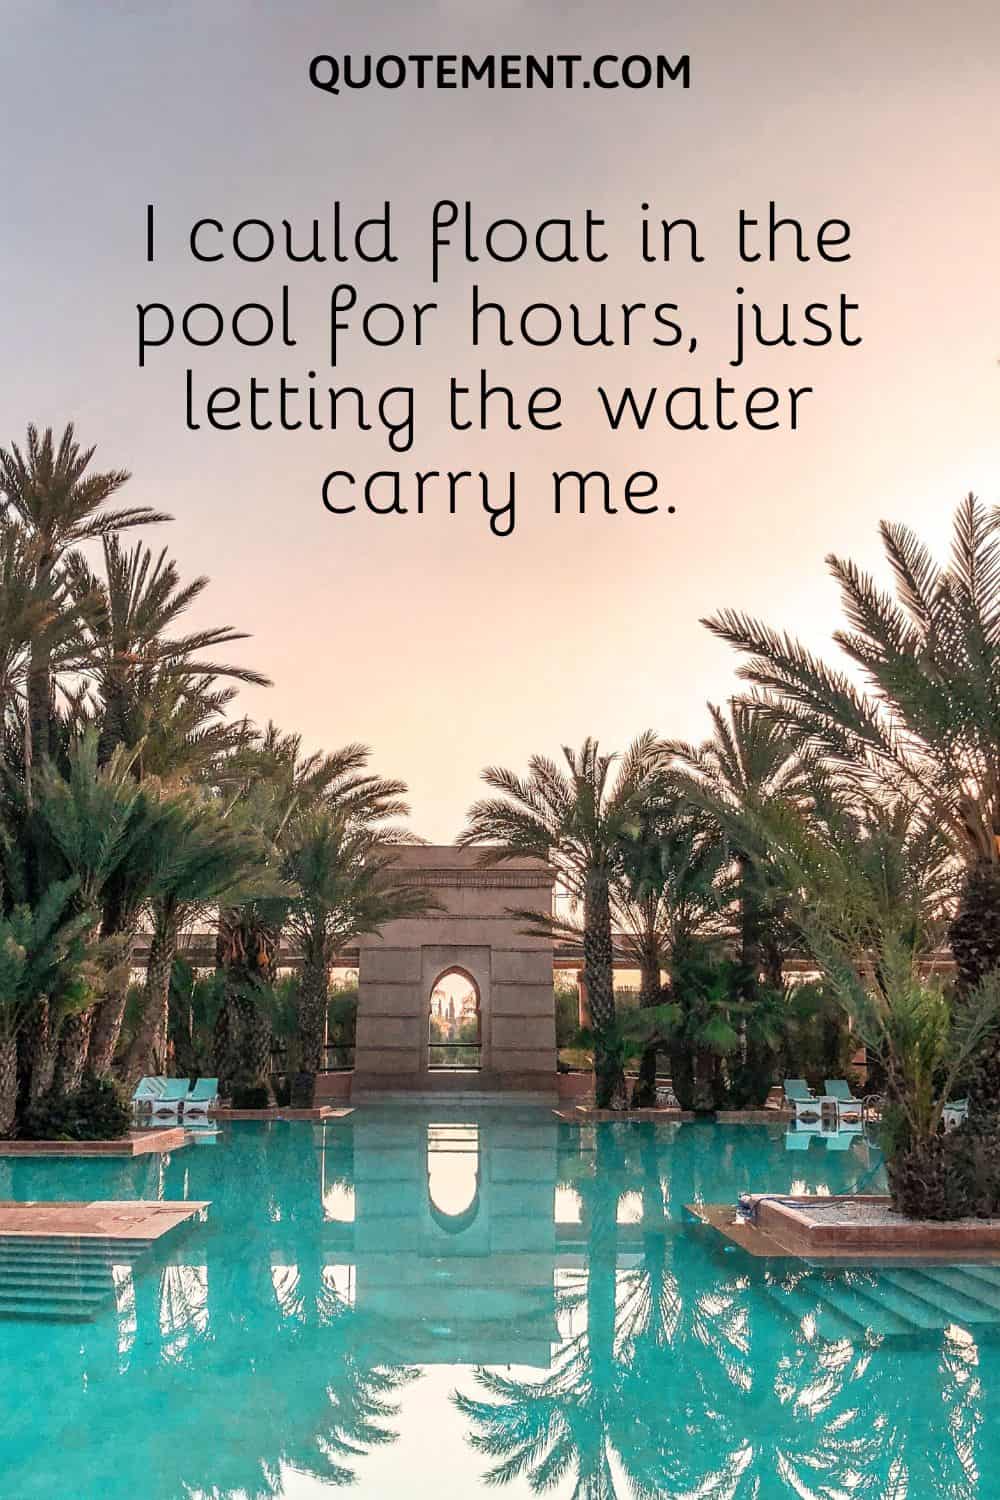 I could float in the pool for hours, just letting the water carry me.